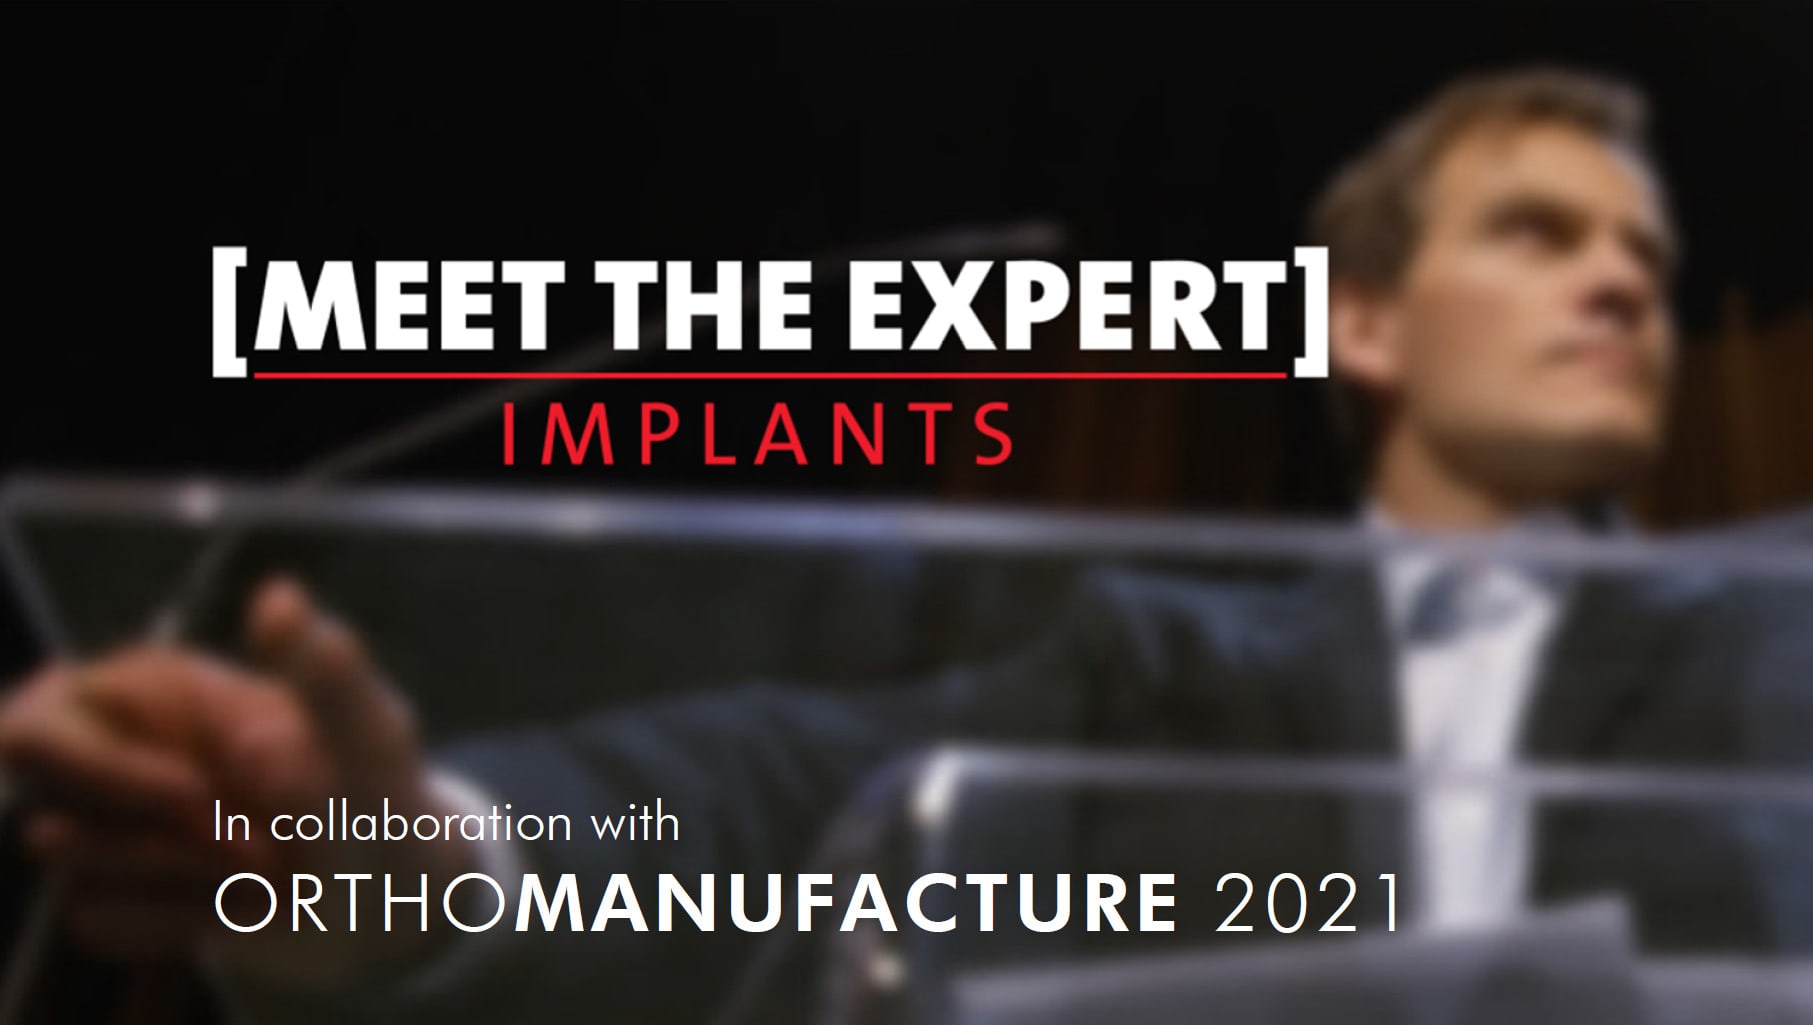 [MEET THE EXPERT] Implants / ORTHOMANUFACTURE 2021, 28/29 April, Online event